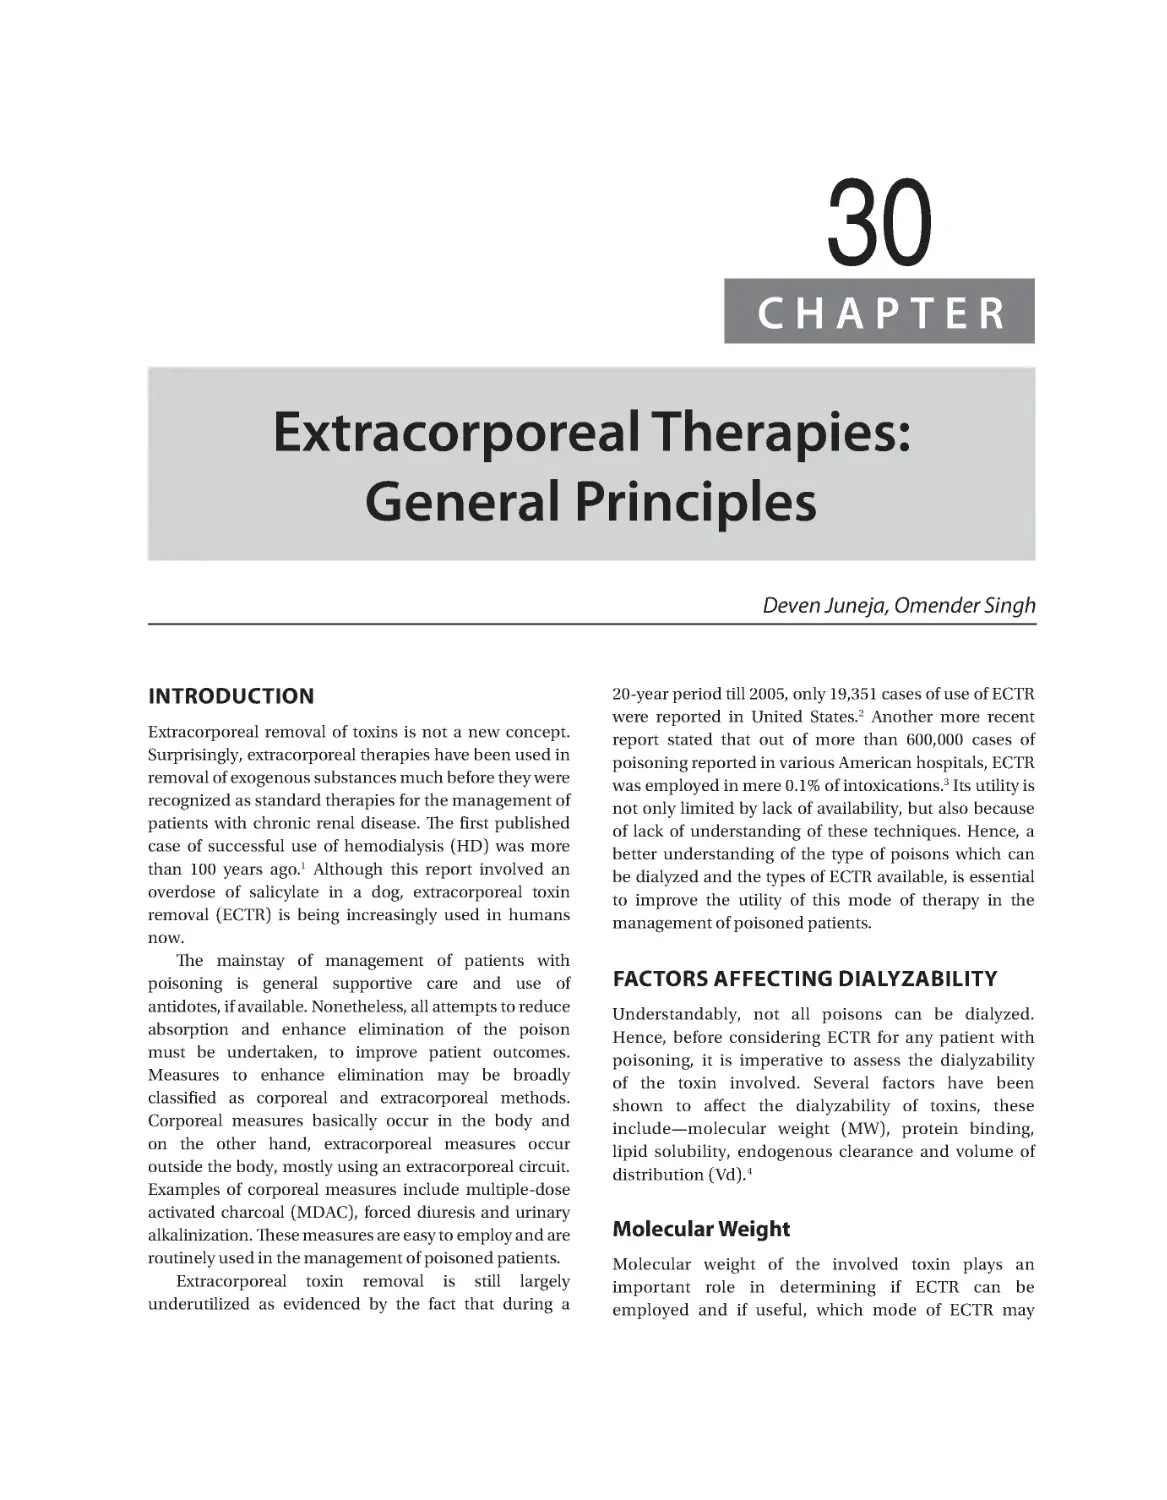 Chapter 30: Extracorporeal Therapies: General Principles